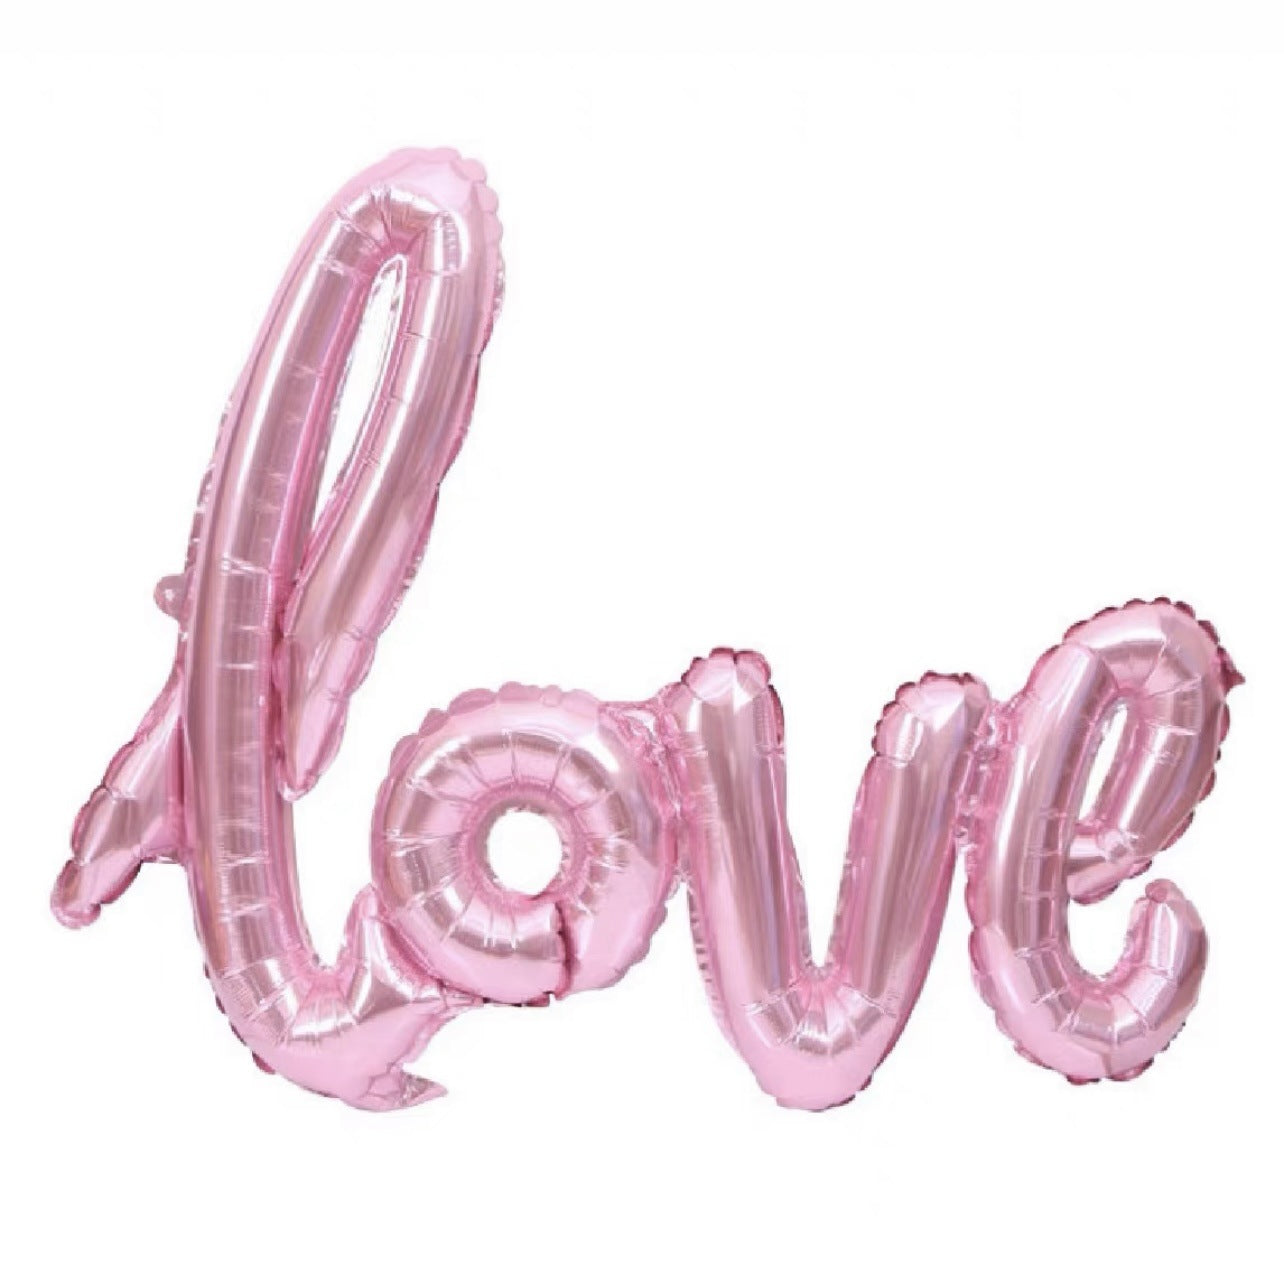 Large Birthday Party Background Wall Balloon, Valentine's Day decor, Romantic home accents, Heart-themed decorations, Cupid-inspired ornaments, Love-themed party supplies, Red and pink decor, Valentine's Day table settings, Romantic ambiance accessories, Heart-shaped embellishments, Valentine's Day home embellishments